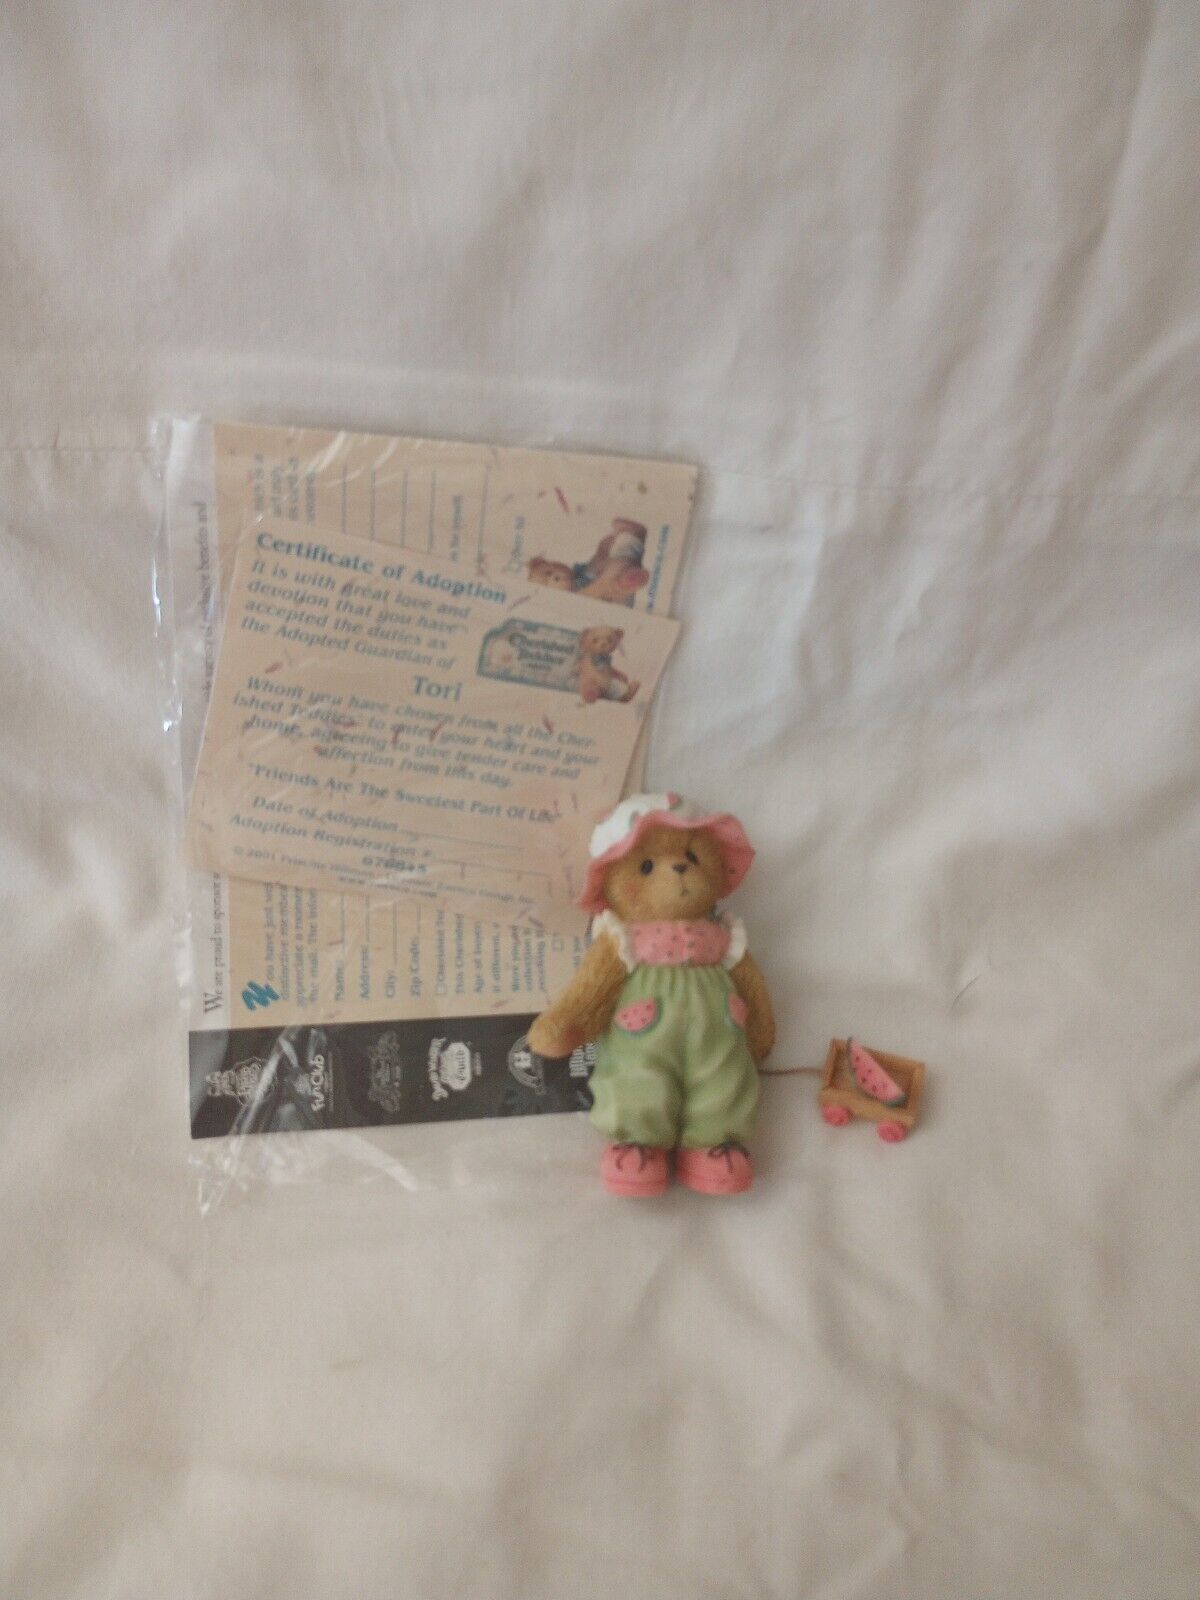 2001 Cherished Teddies  Tori #676845 “Friends Are The Sweetest Part Of Life”Box